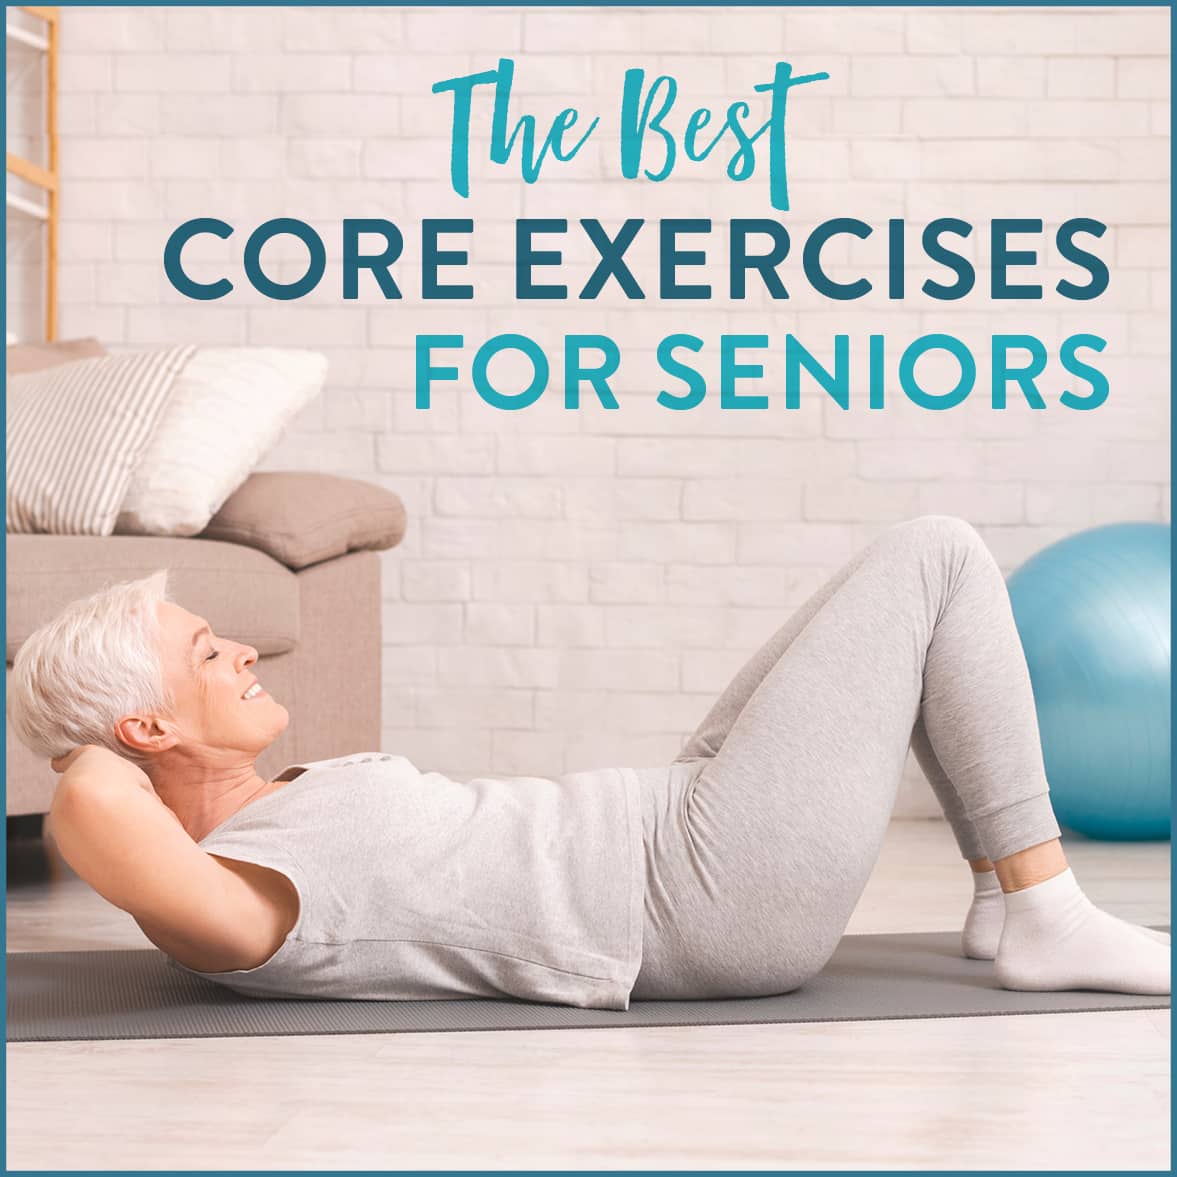 The Best Core Exercises for Seniors [Full Workout]